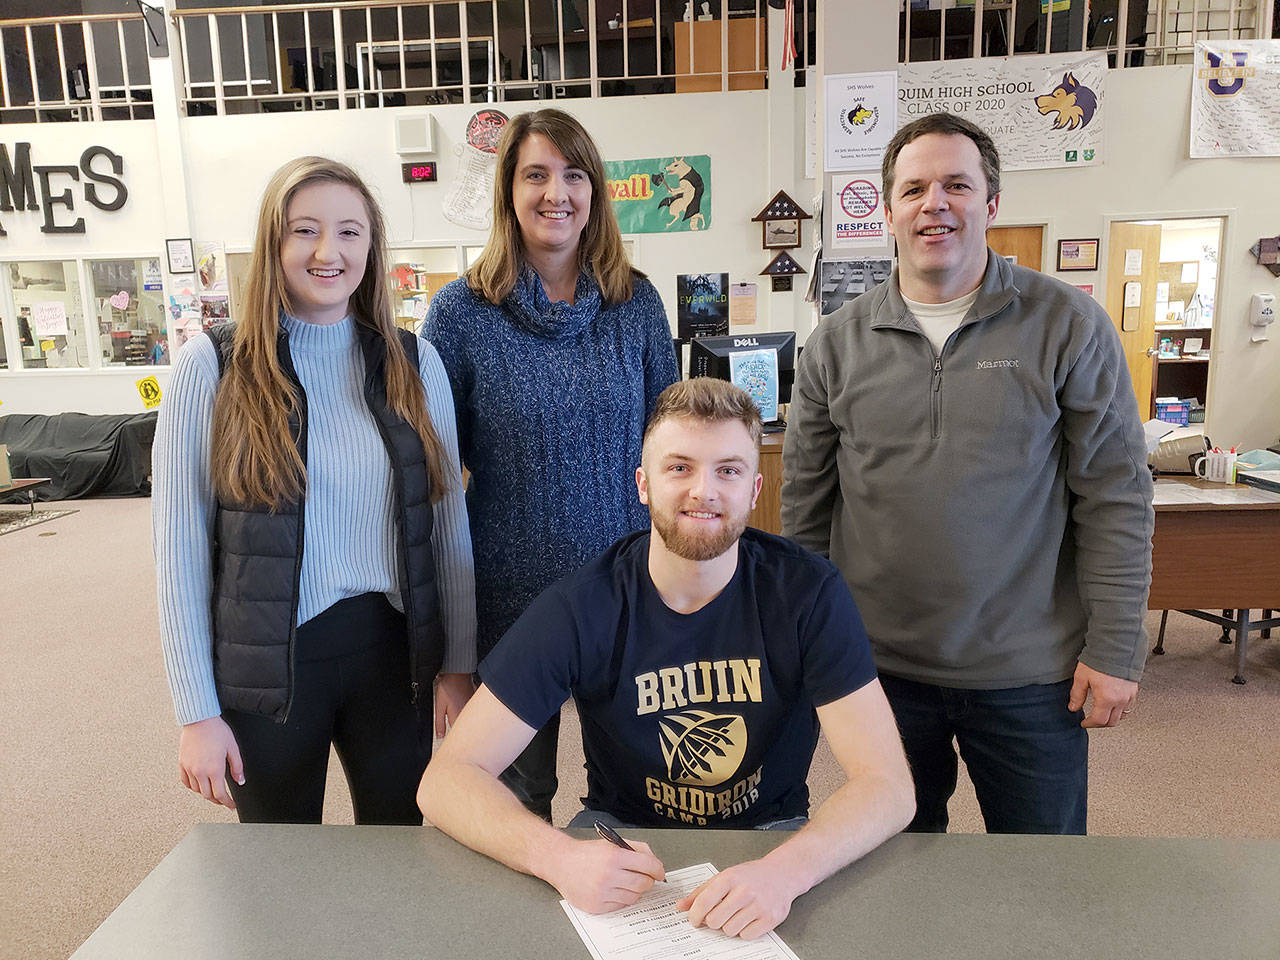 Sequim senior quarterback Riley Cowan has signed a letter of intent to play football at George Fox University. Riley is joined in the photo by his family from left, sister Brianna Cowan, mom Heather Cowan, and dad Dave Cowan.